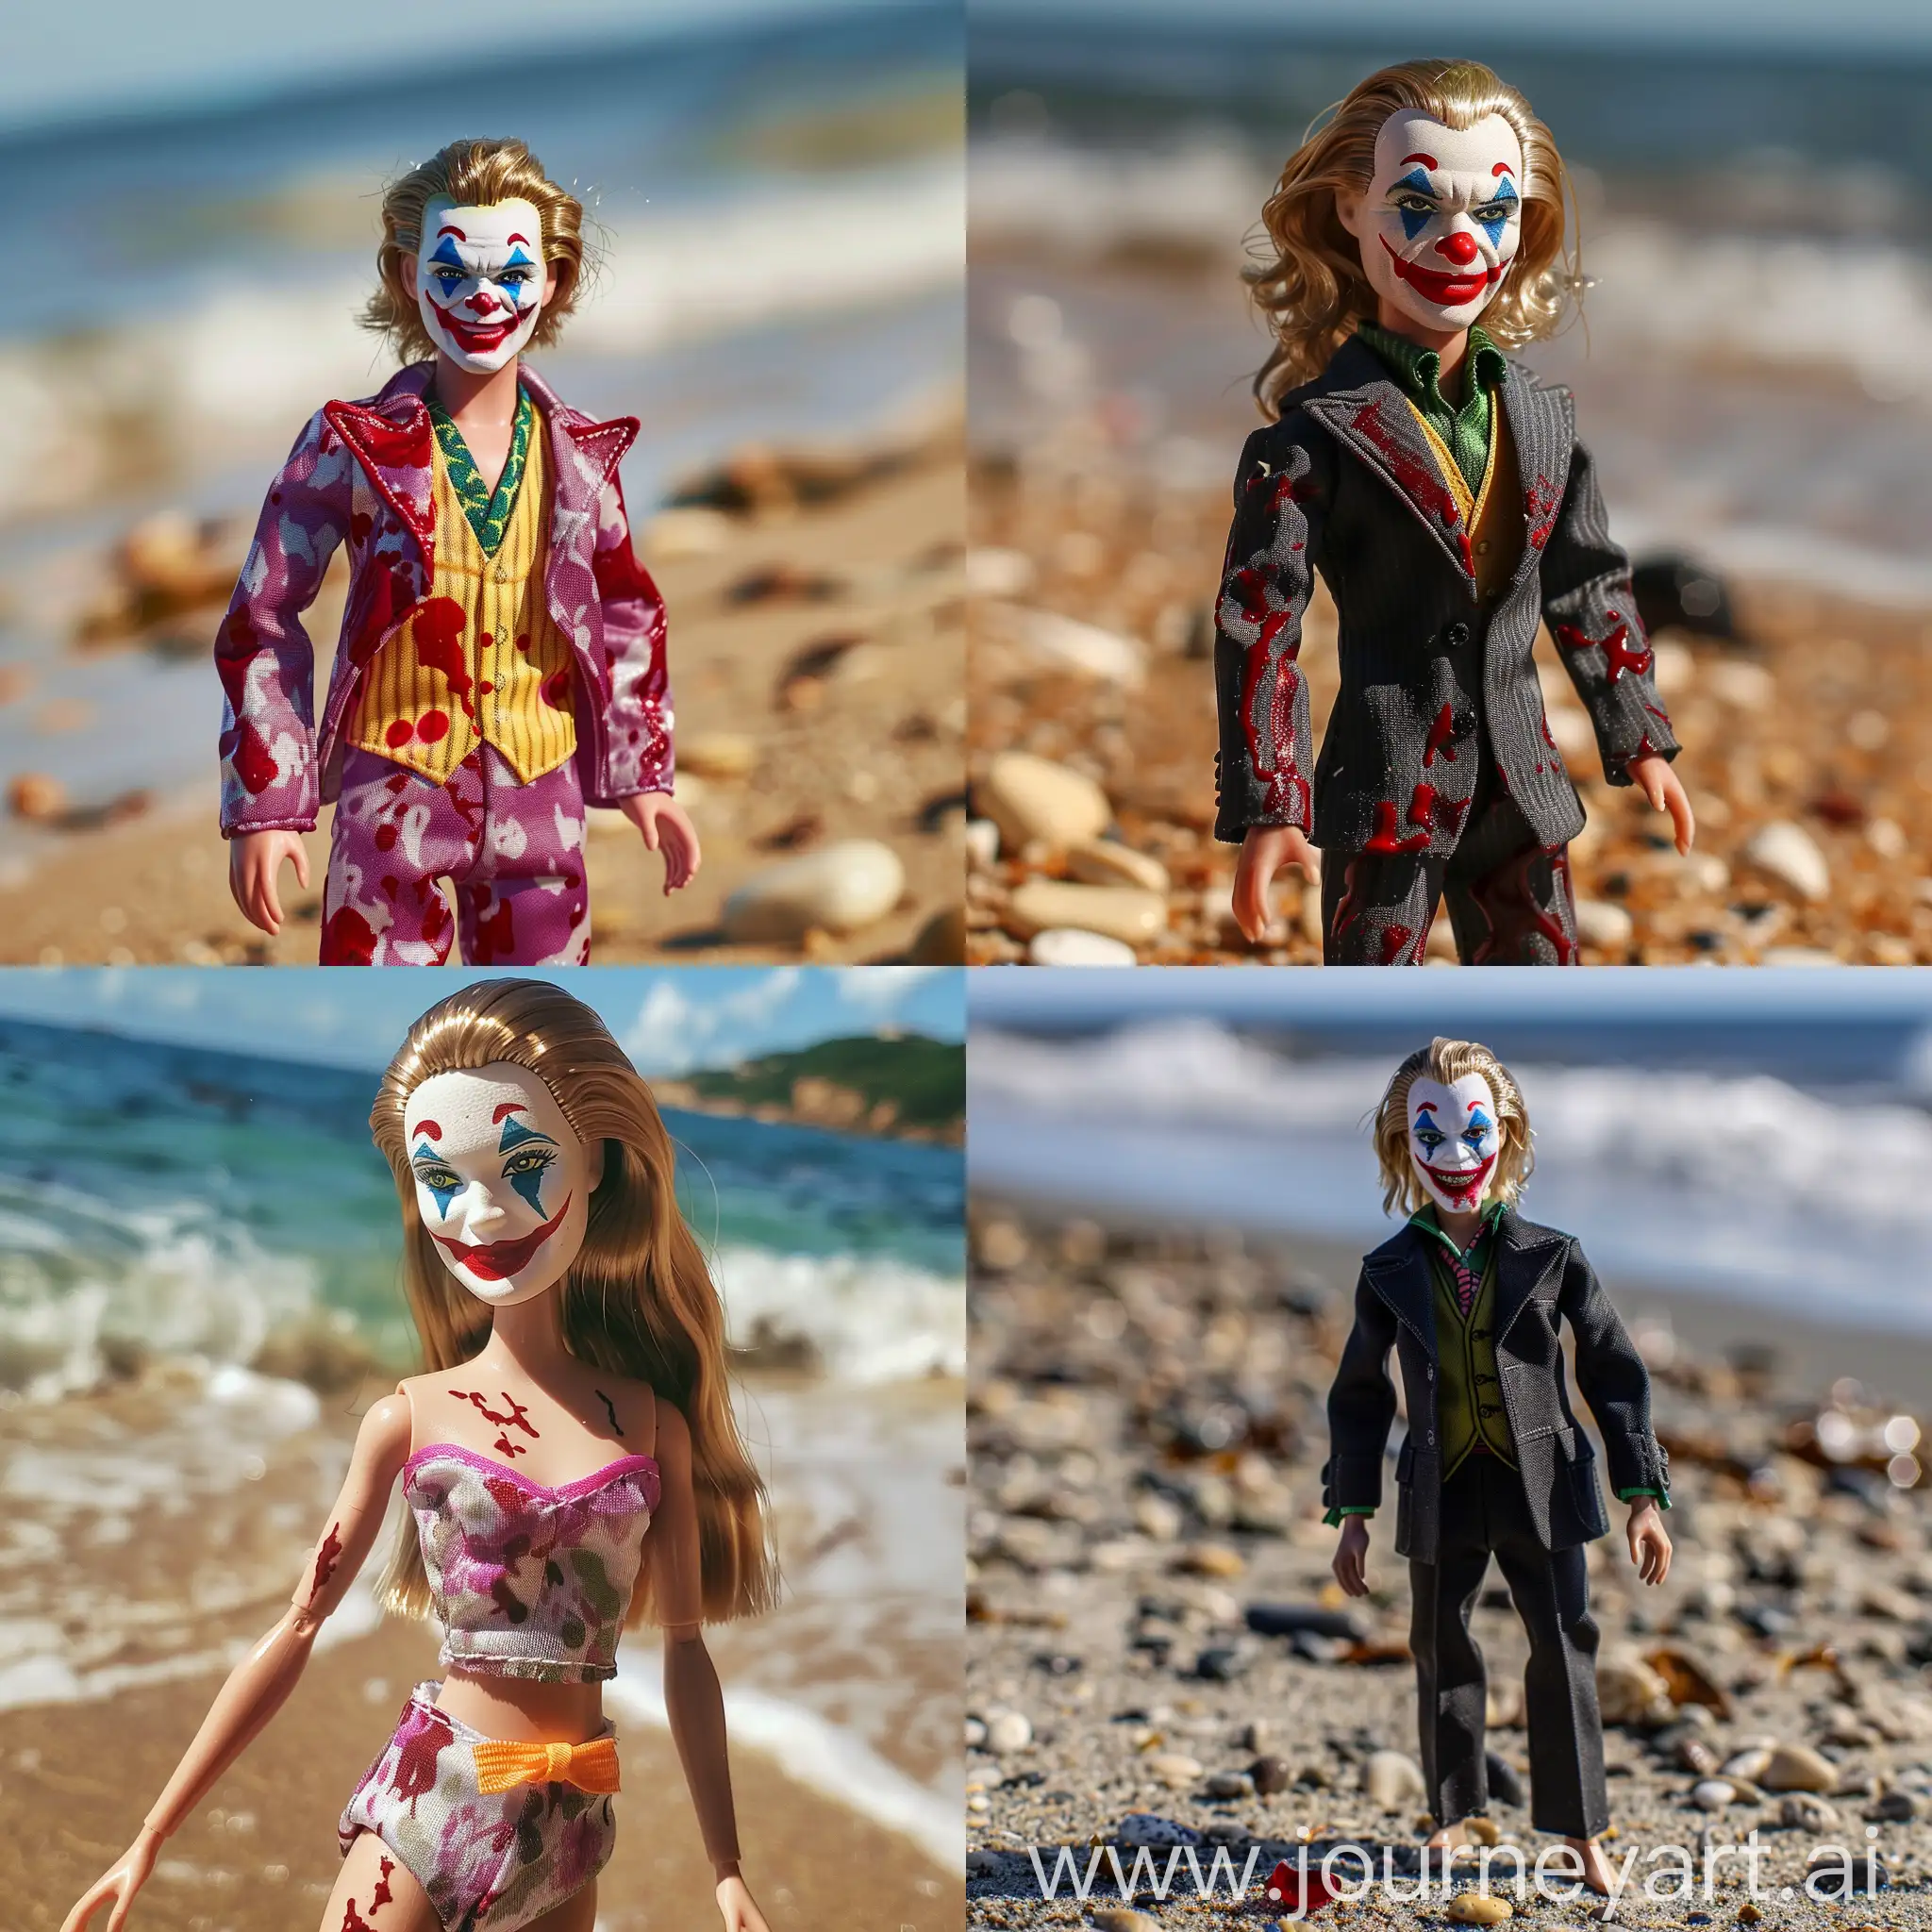 Sinister-Joker-in-Barbie-Suit-Amidst-Beach-Bloodshed